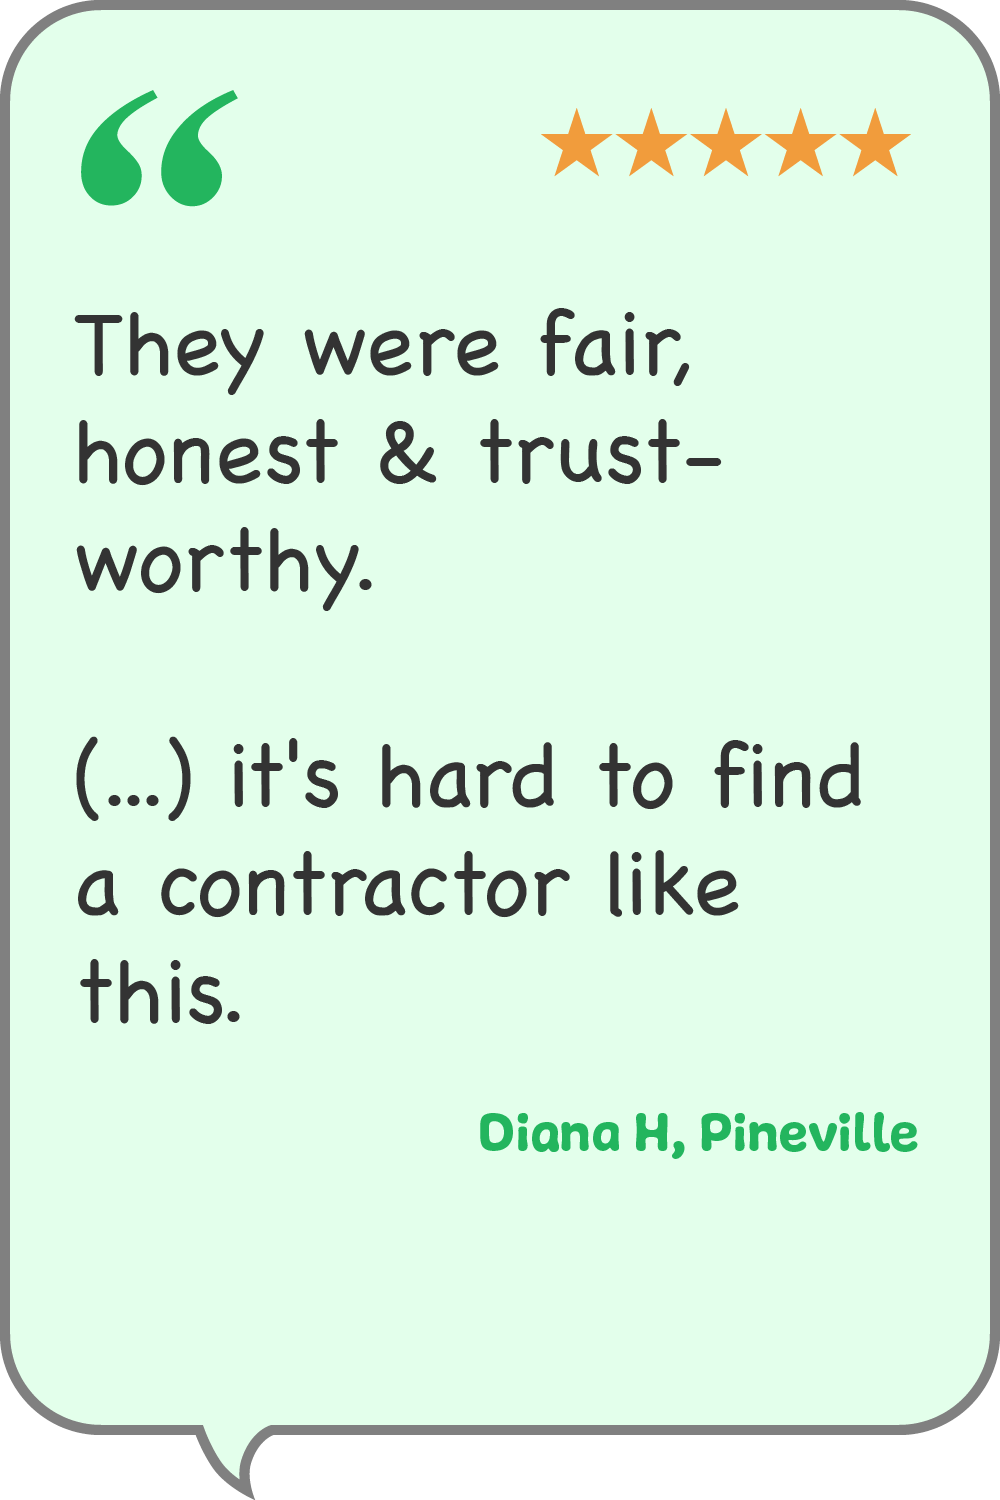 lasting-impressions-testimonials-diana-h-pineville.png